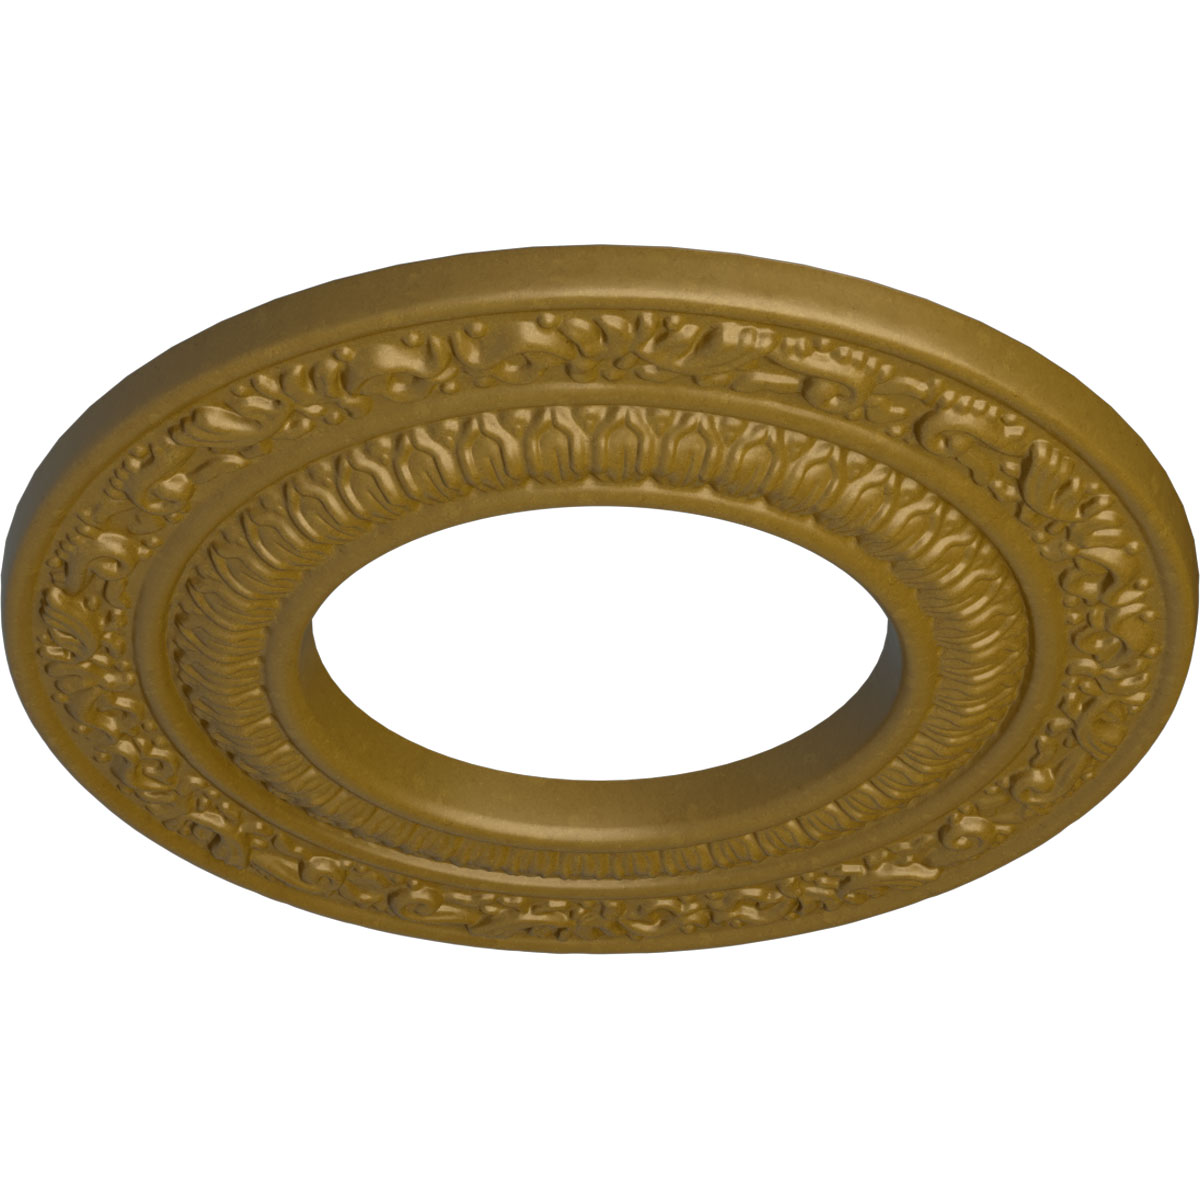 Ekena Millwork 8 1/8"OD x 4 1/8"ID x 1/2"P Andrea Ceiling Medallion (Fits Canopies up to 4 1/8"), Hand-Painted Gold - image 2 of 4